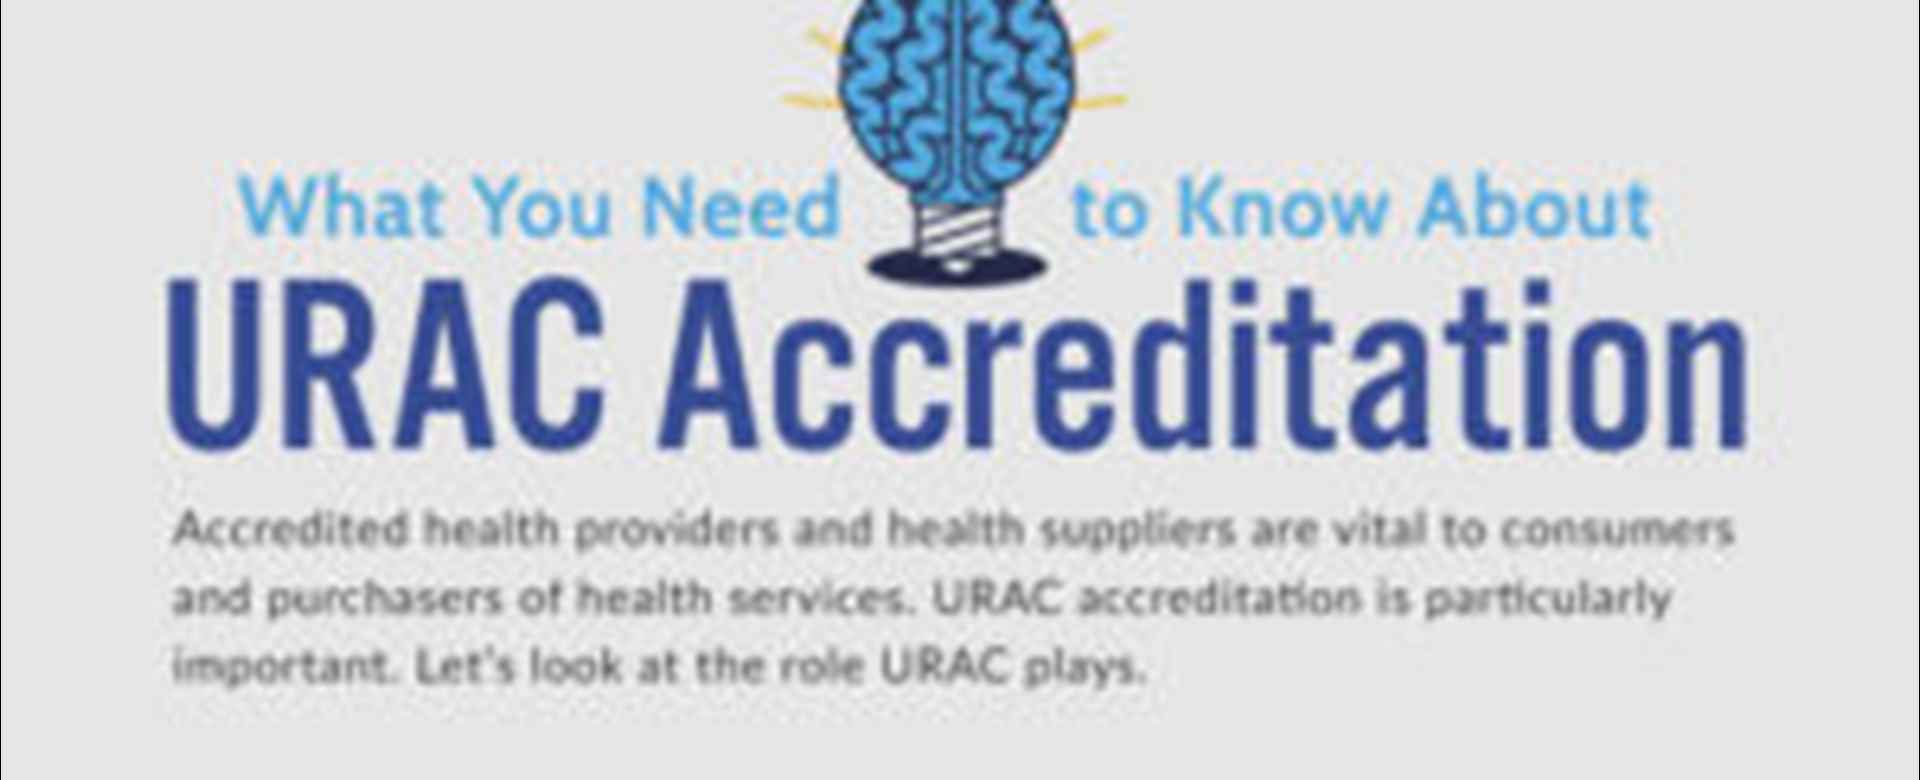 URAC Accreditation - Just what is it? [Infographic]